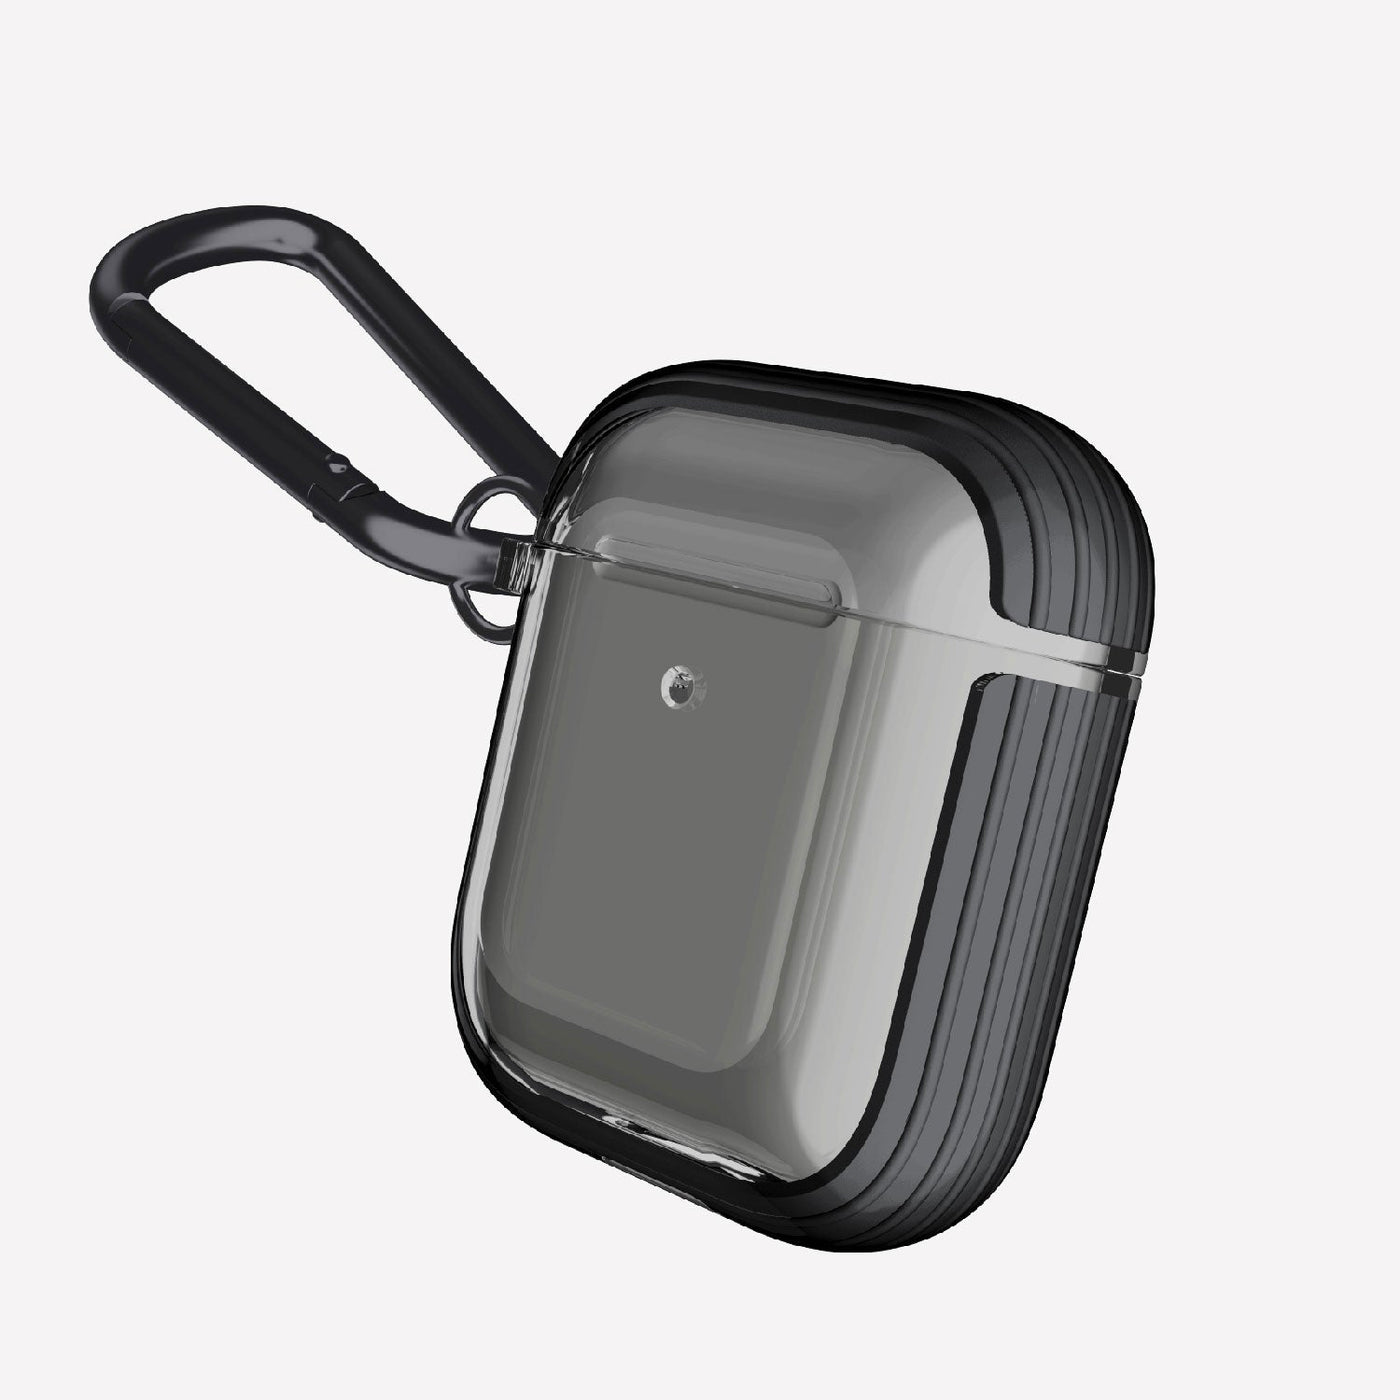 Apple AirPods Case - CLEAR